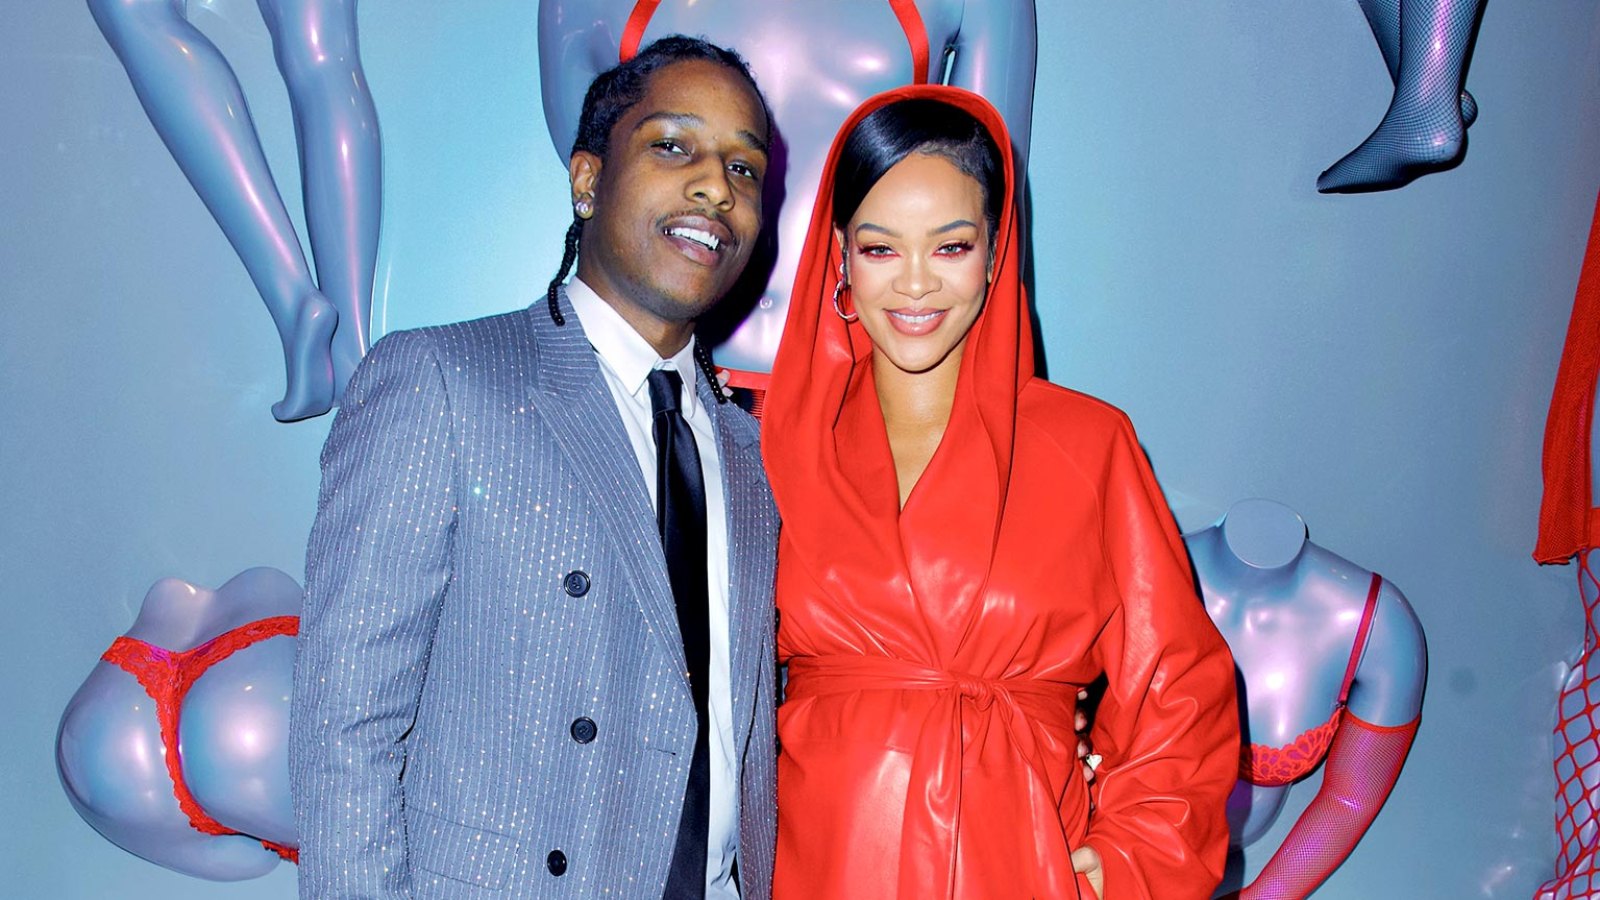 ASAP Rocky Refers to Pregnant Rihanna as His Wife During Her Surprise Appearance at His Performance